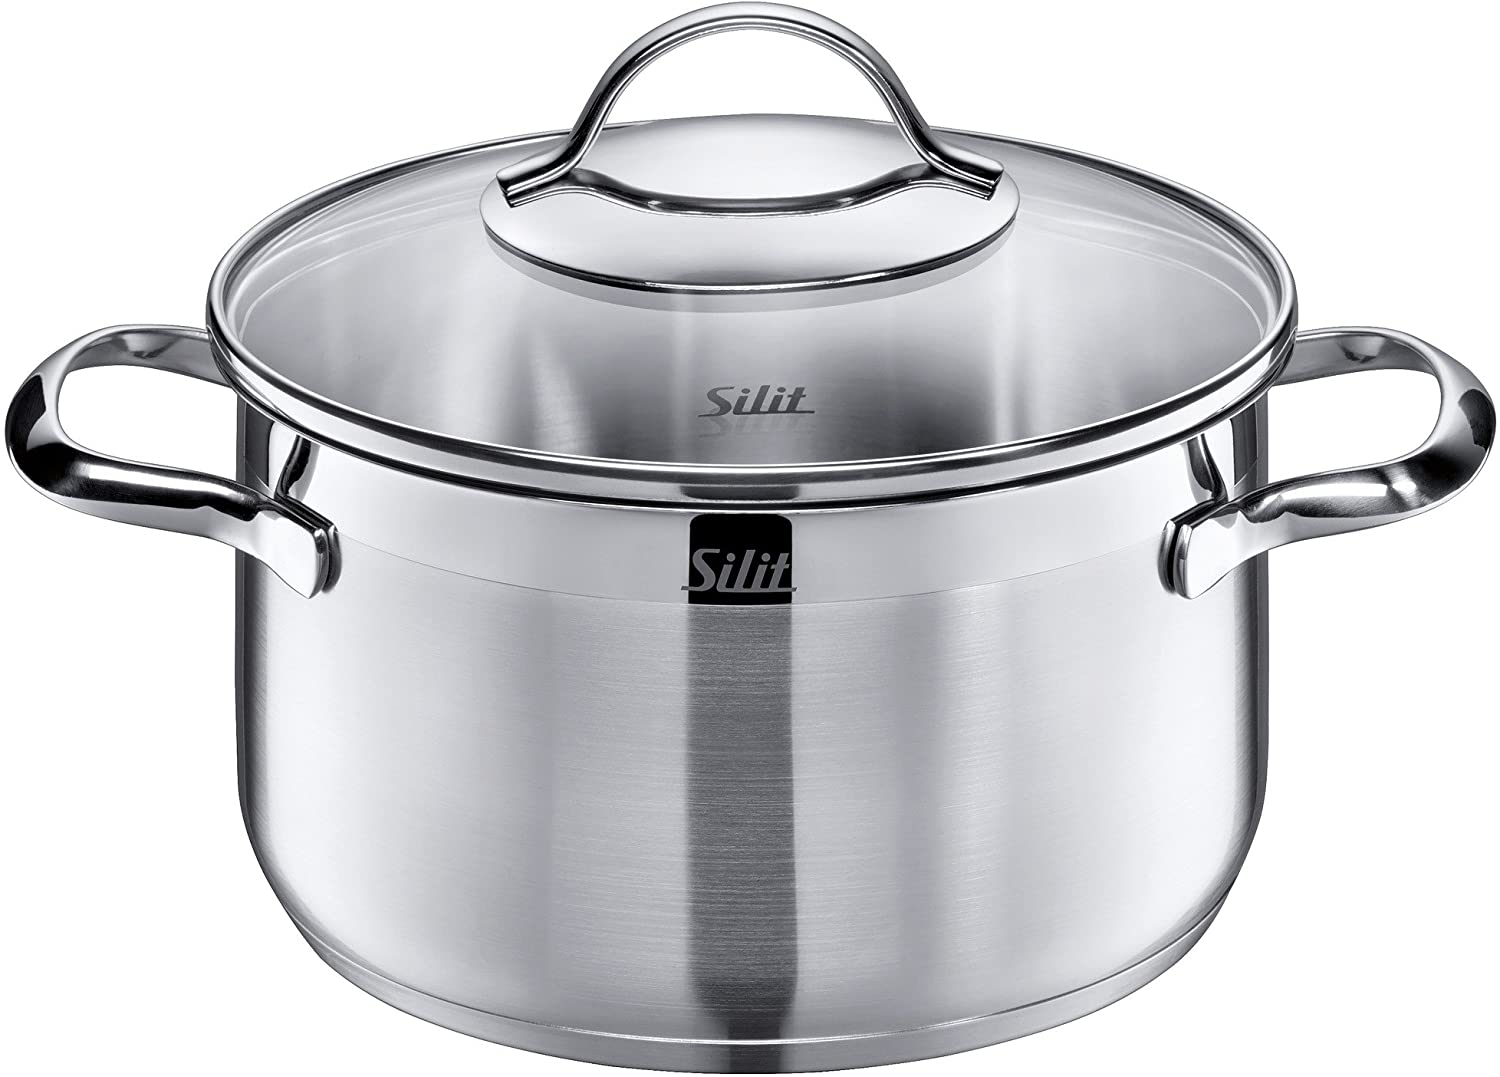 Silit Achat Cooking Pot Large 20 cm Glass Lid Meat Pot Induction 3.3 L Stainless Steel Partially Matted Uncoated Oven Safe